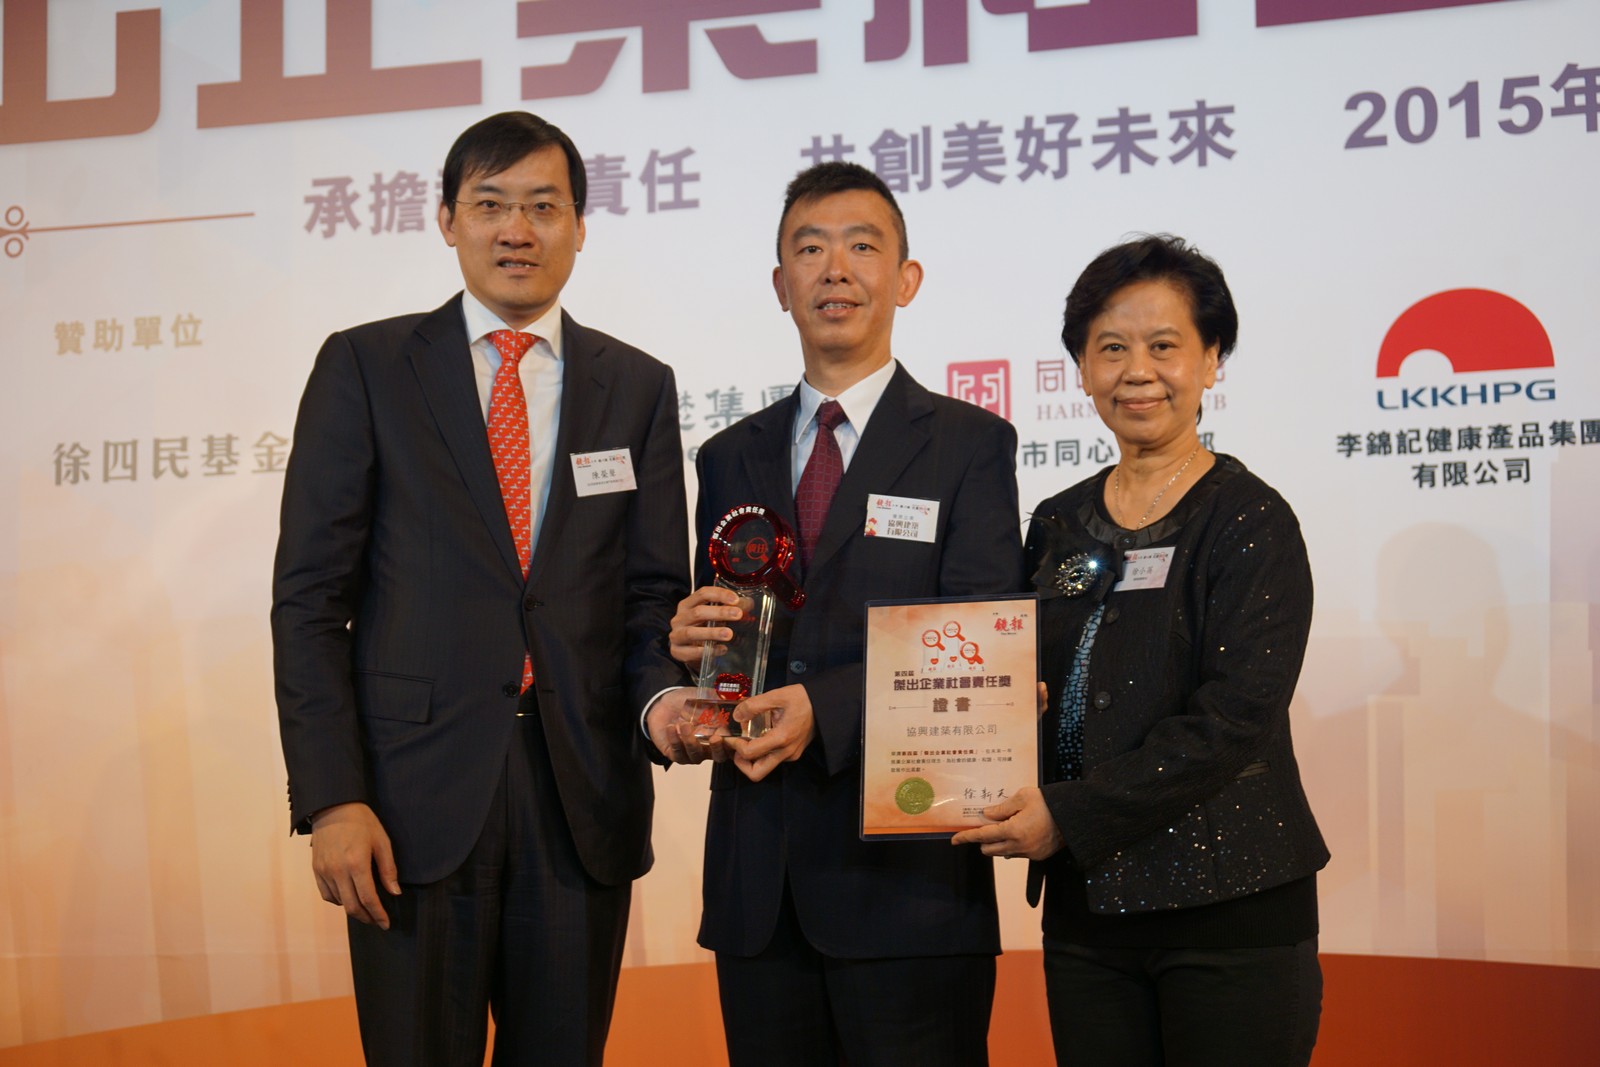 Mr KH Woo (Middle), Chairman of Hip Hing-Vibro CSR Committee, represents the Company to receive the award